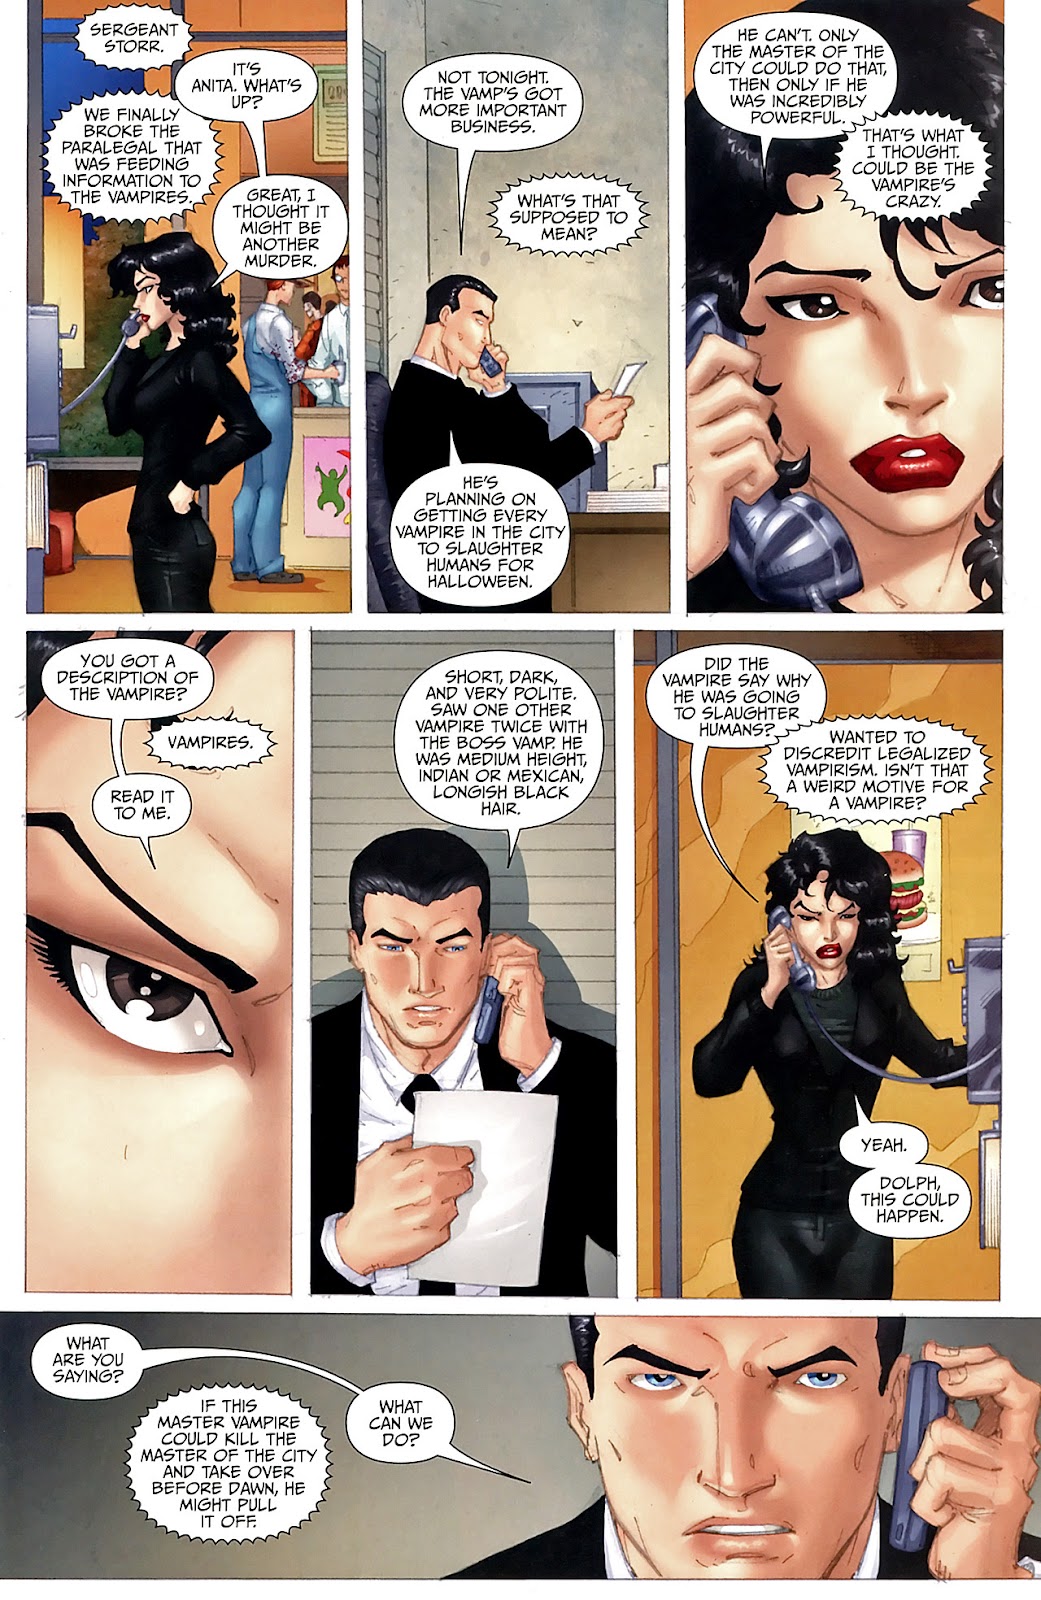 Anita Blake, Vampire Hunter: Circus of the Damned - The Scoundrel issue 4 - Page 4